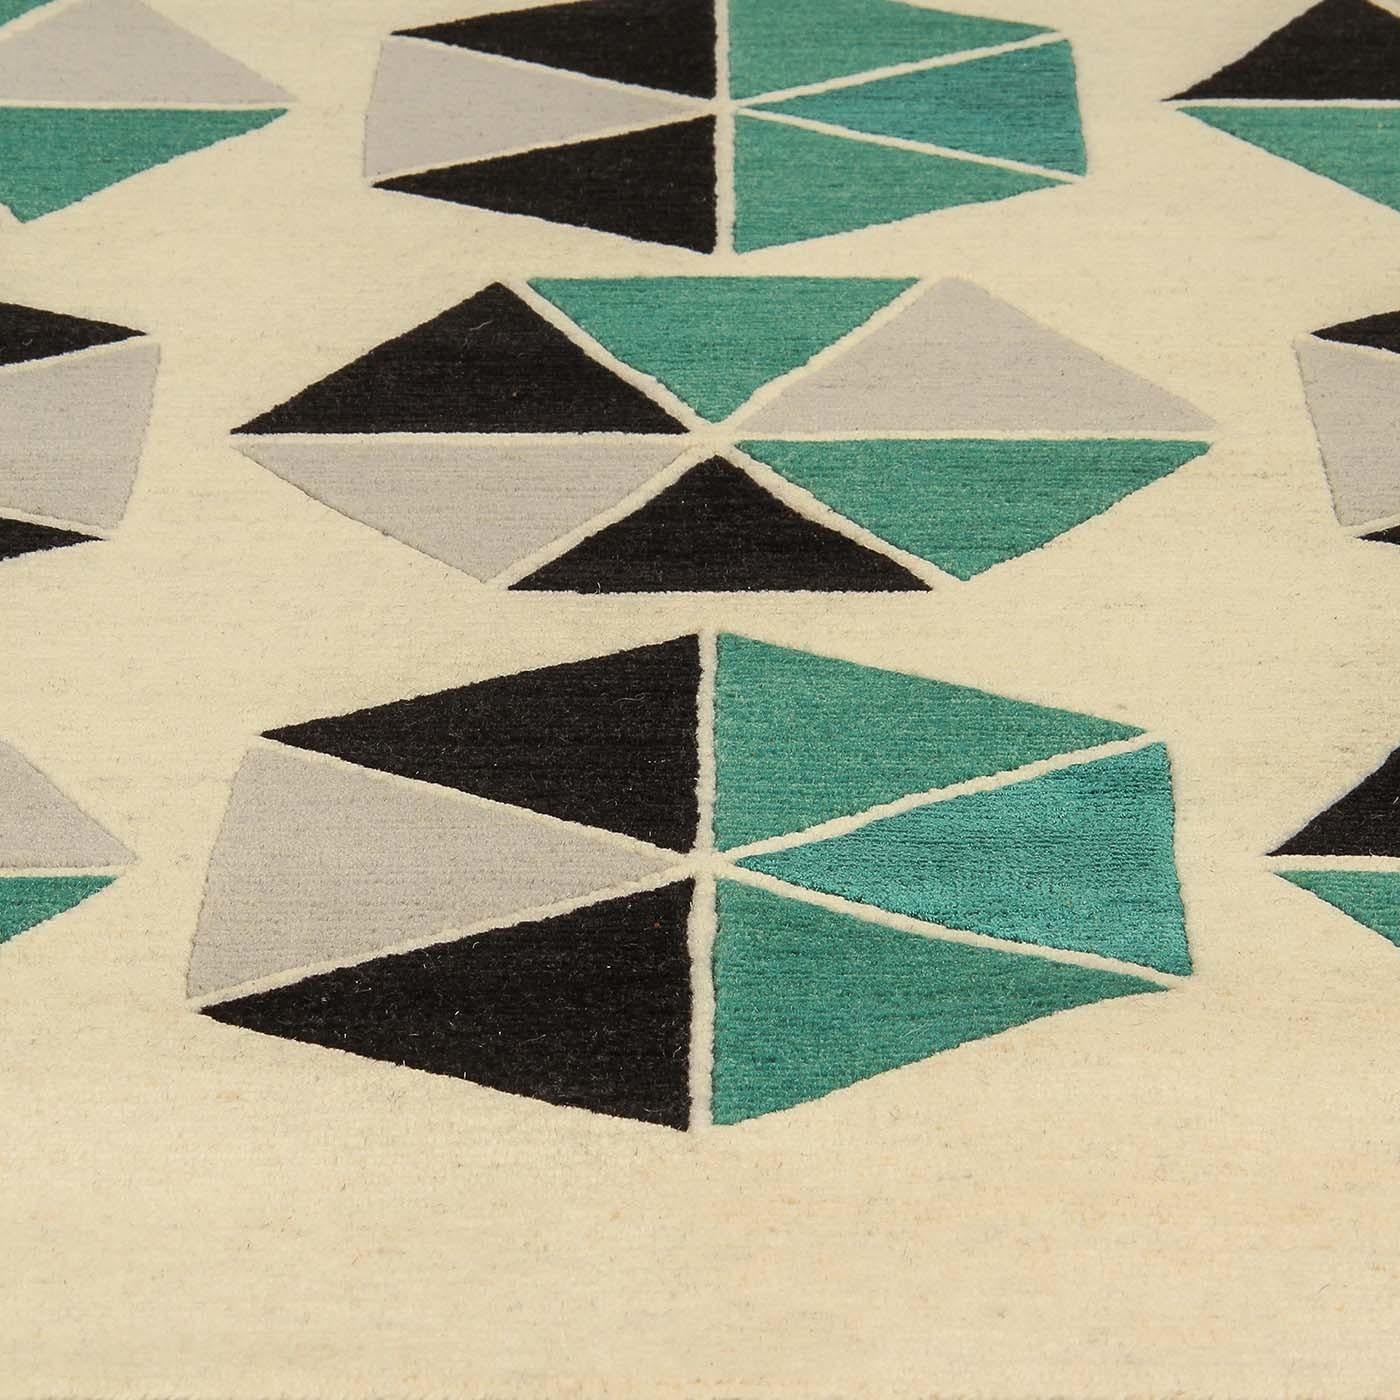 A fun and playful carpet inspired by a Gio Ponti’s design. Entirely hand spun and hand carded, this Tibetan wool and natural silk carpet (300 x 250cm) adds harmony and a sense of proportion struck by the perfect balance between design, shape and